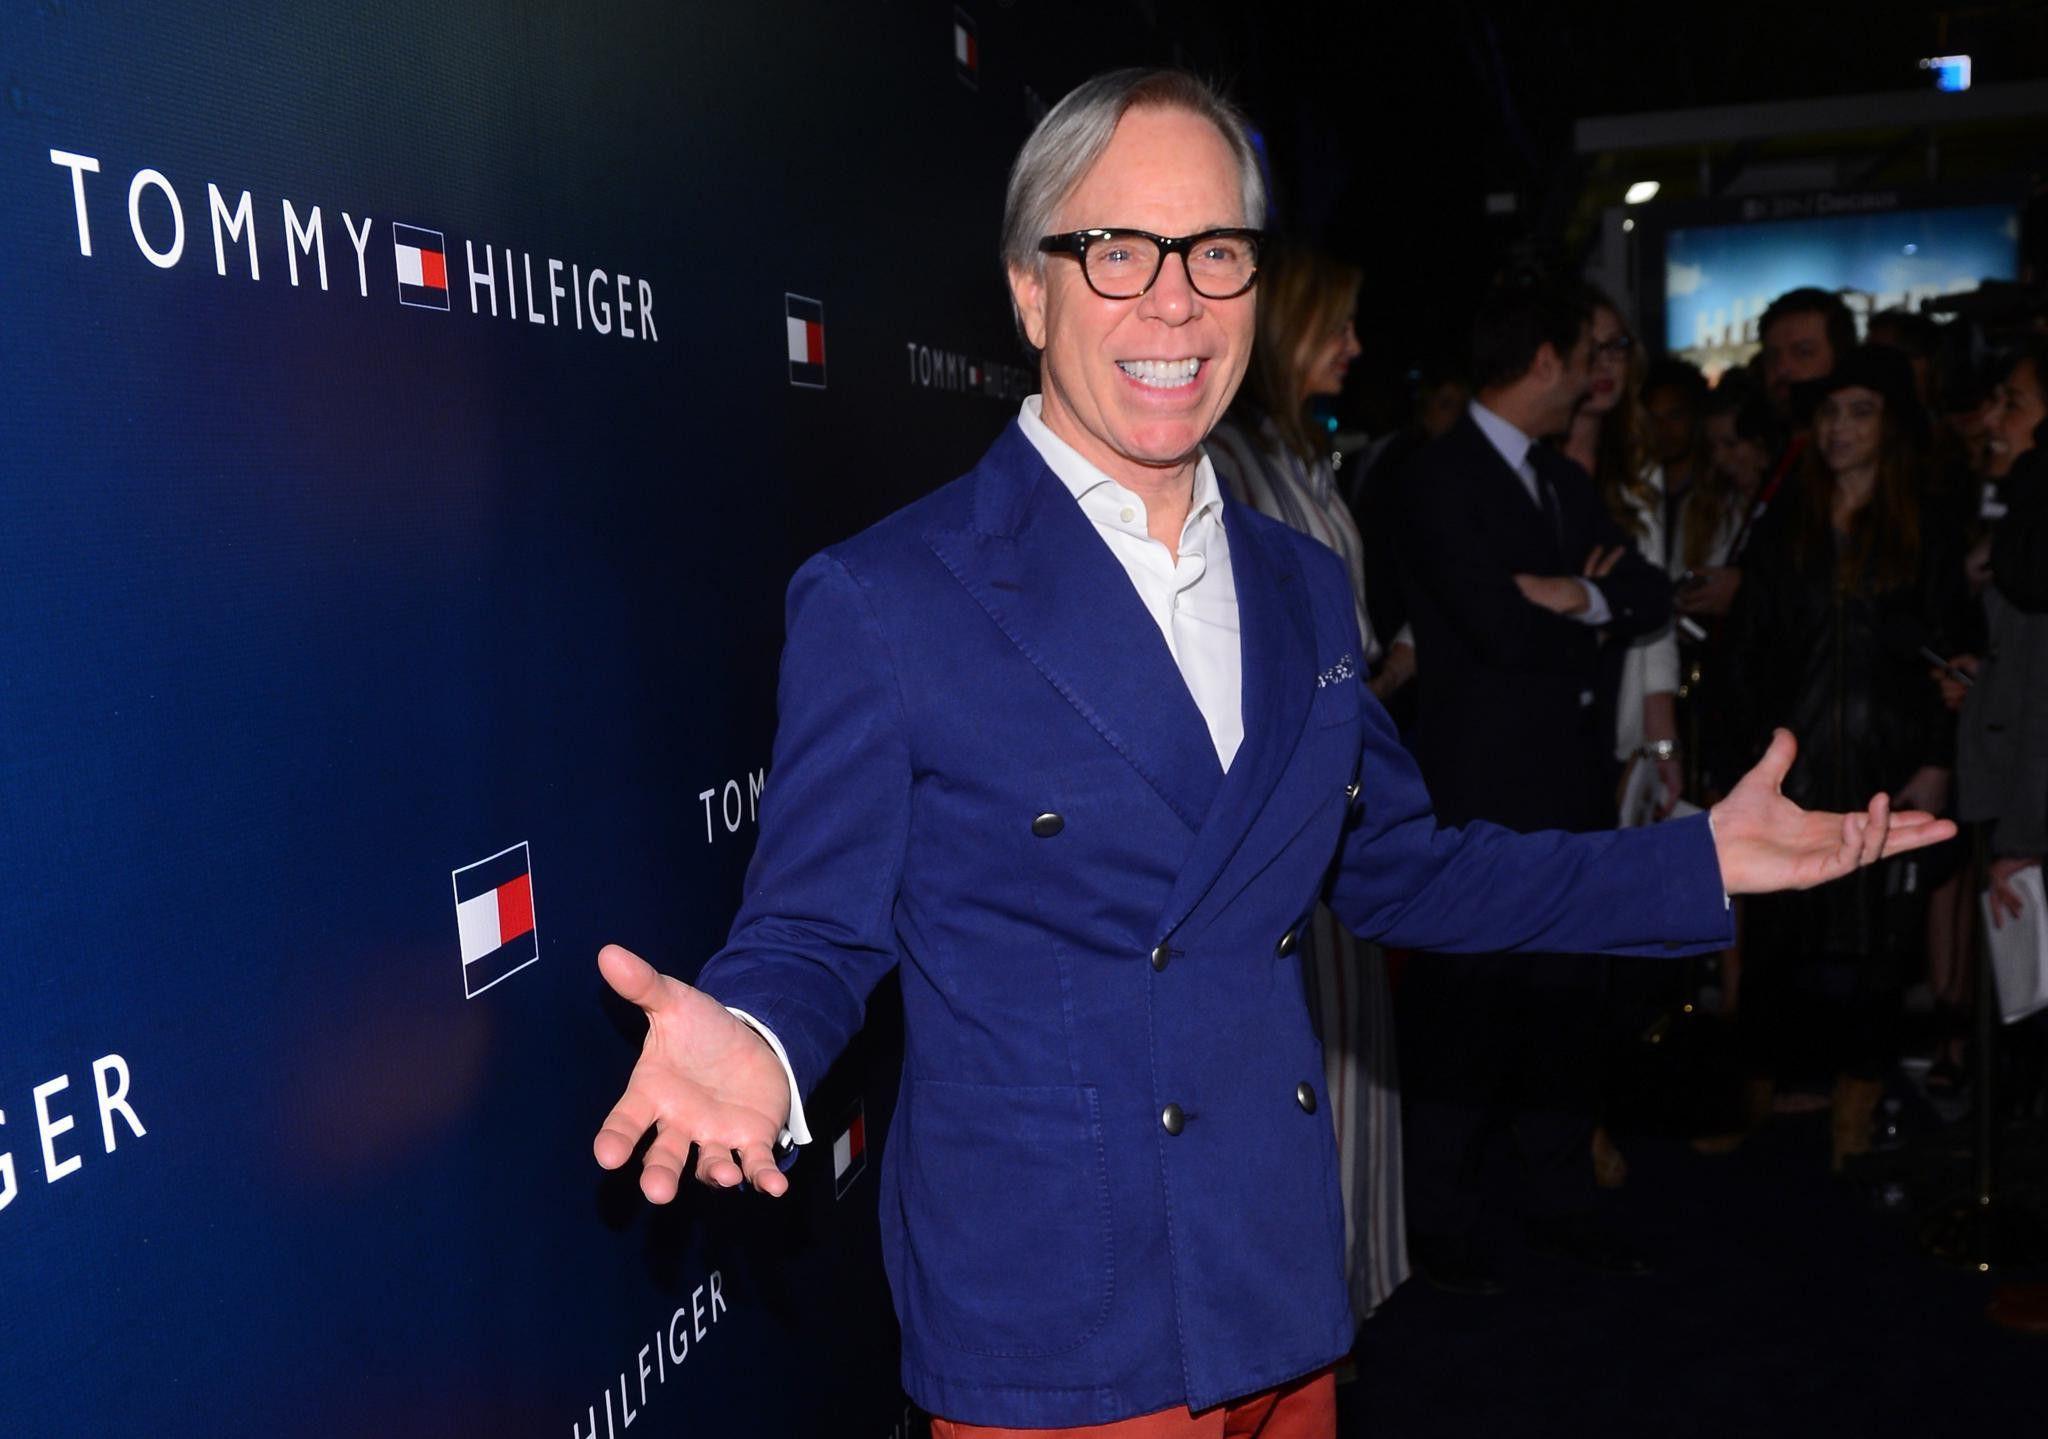 Tommy Hilfiger Wallpapers Image Photos Pictures Backgrounds